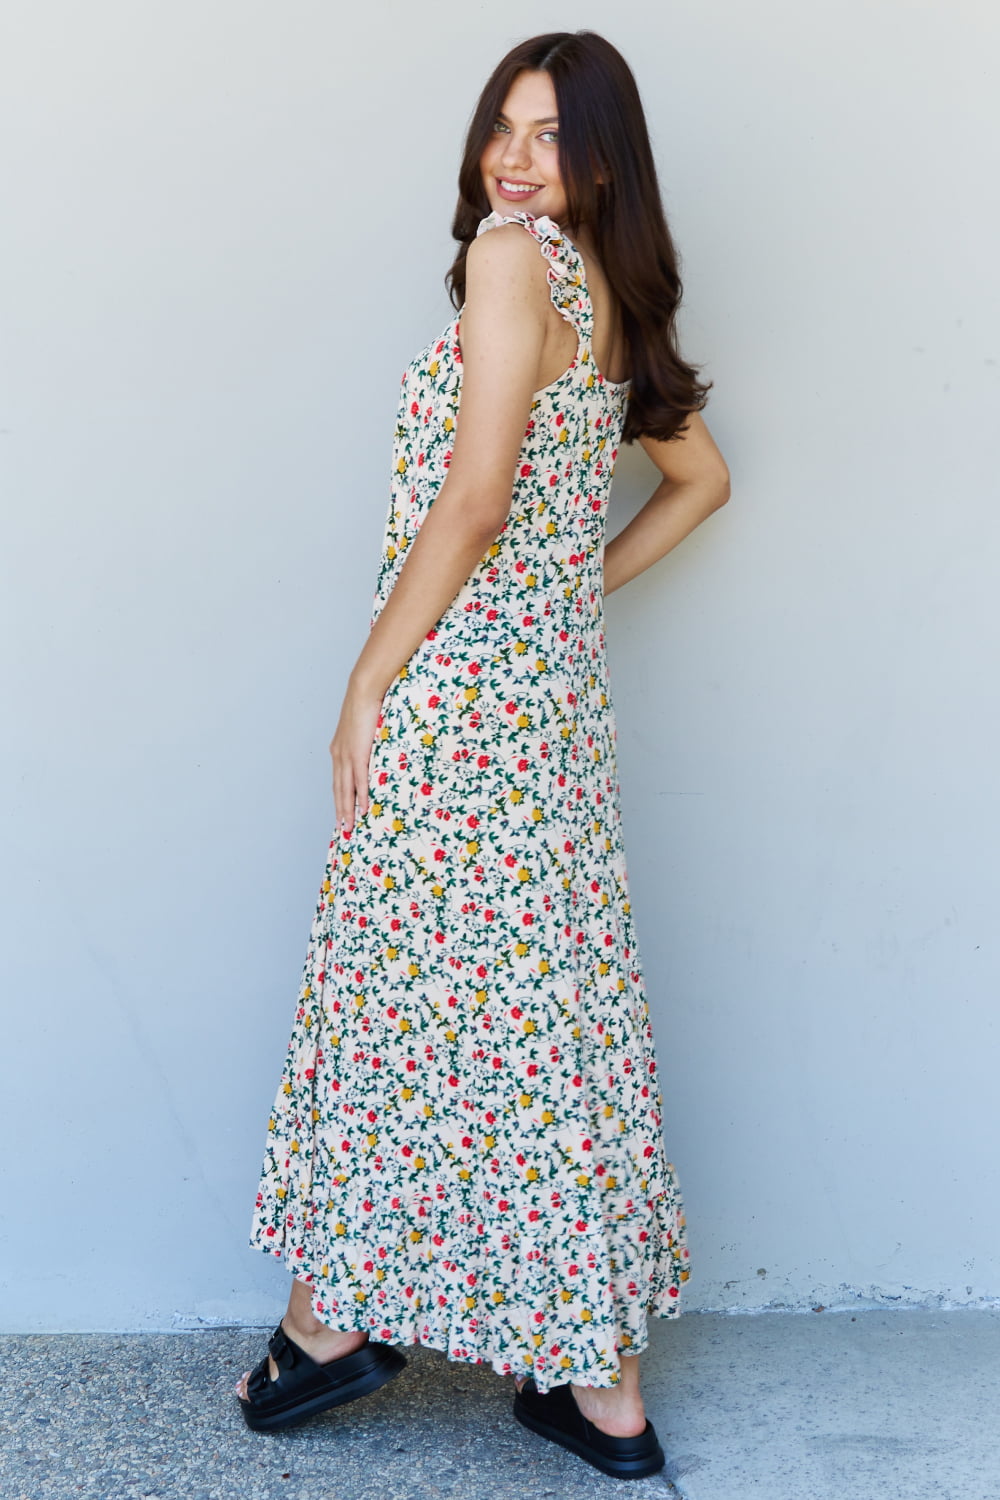 Light Steel Blue Doublju In The Garden Ruffle Floral Maxi Dress in Natural Rose Sentient Beauty Fashions Apparel & Accessories